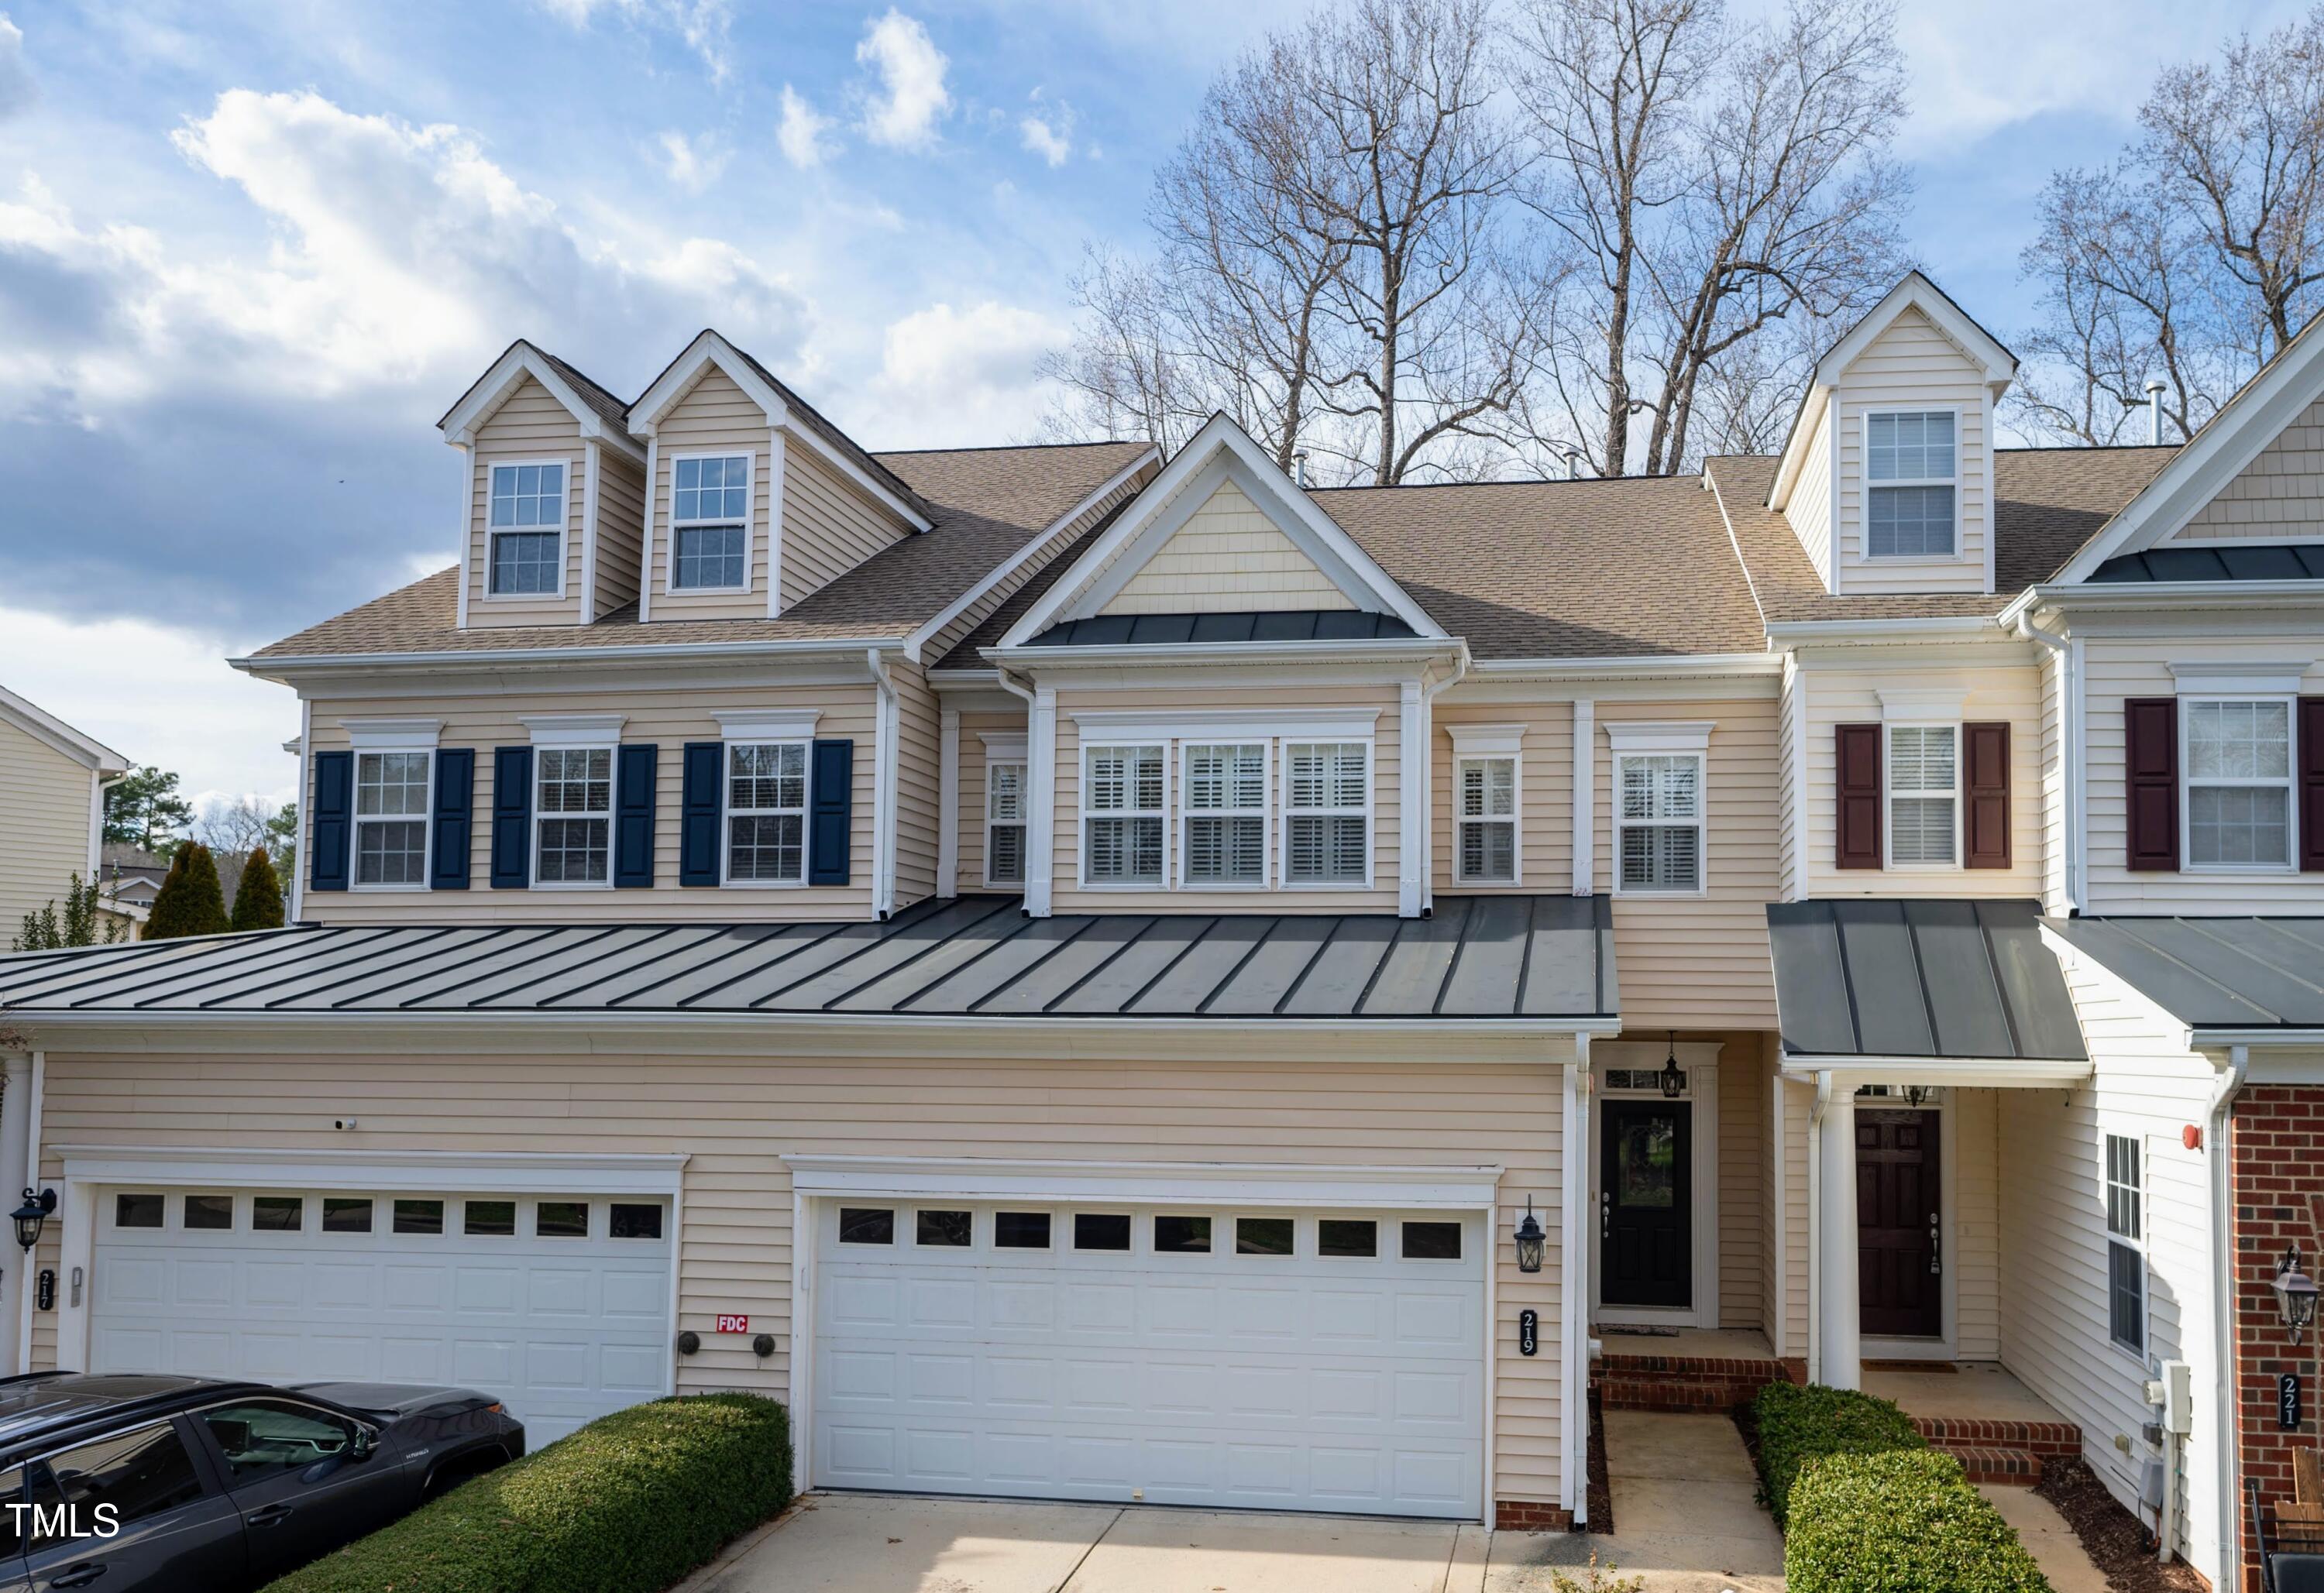 View Chapel Hill, NC 27516 townhome